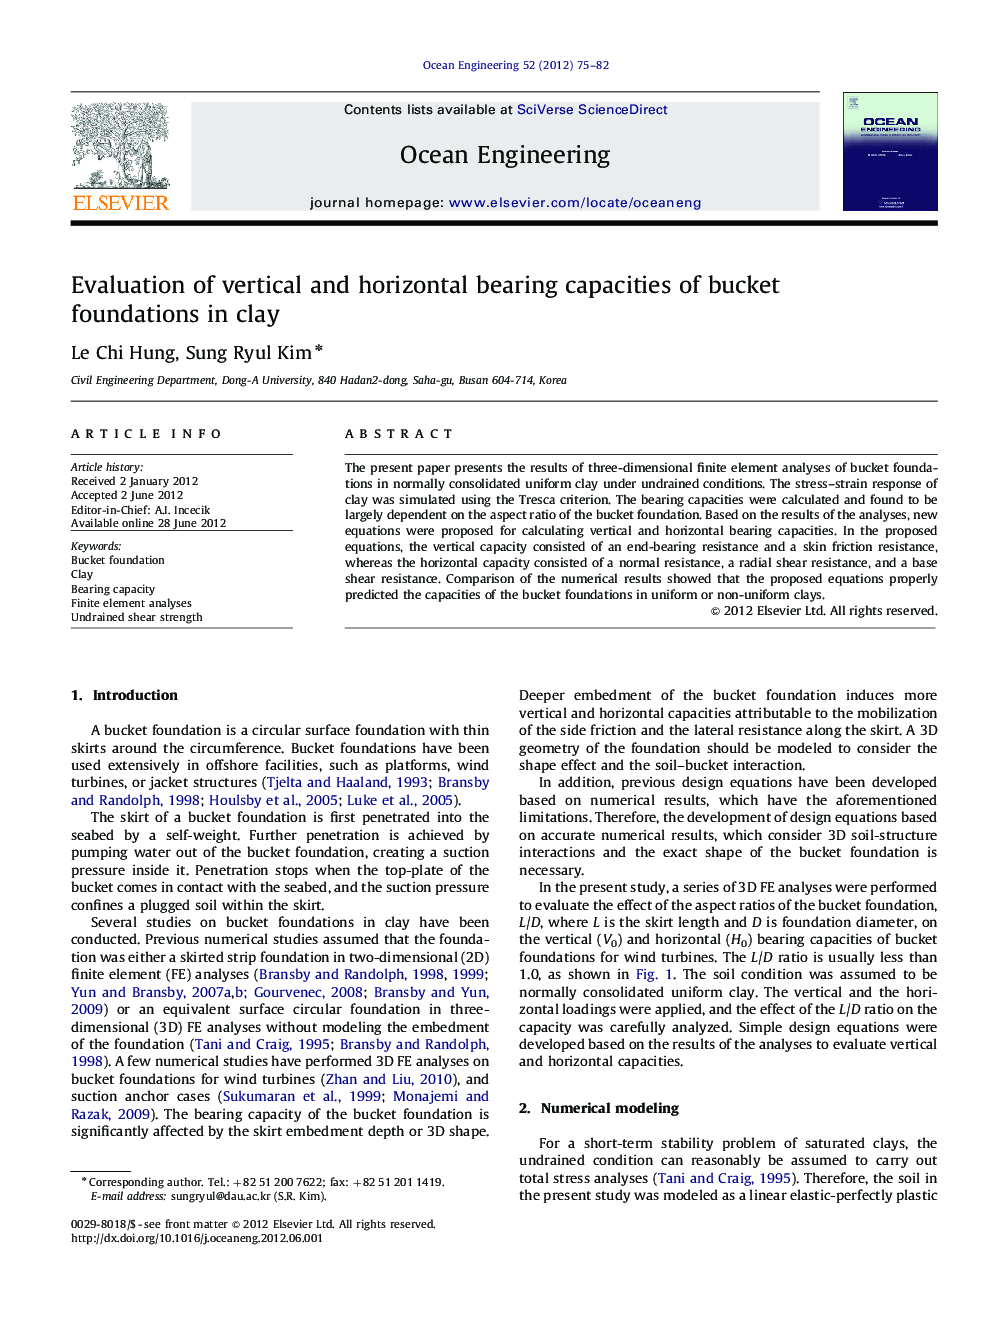 Evaluation of vertical and horizontal bearing capacities of bucket foundations in clay